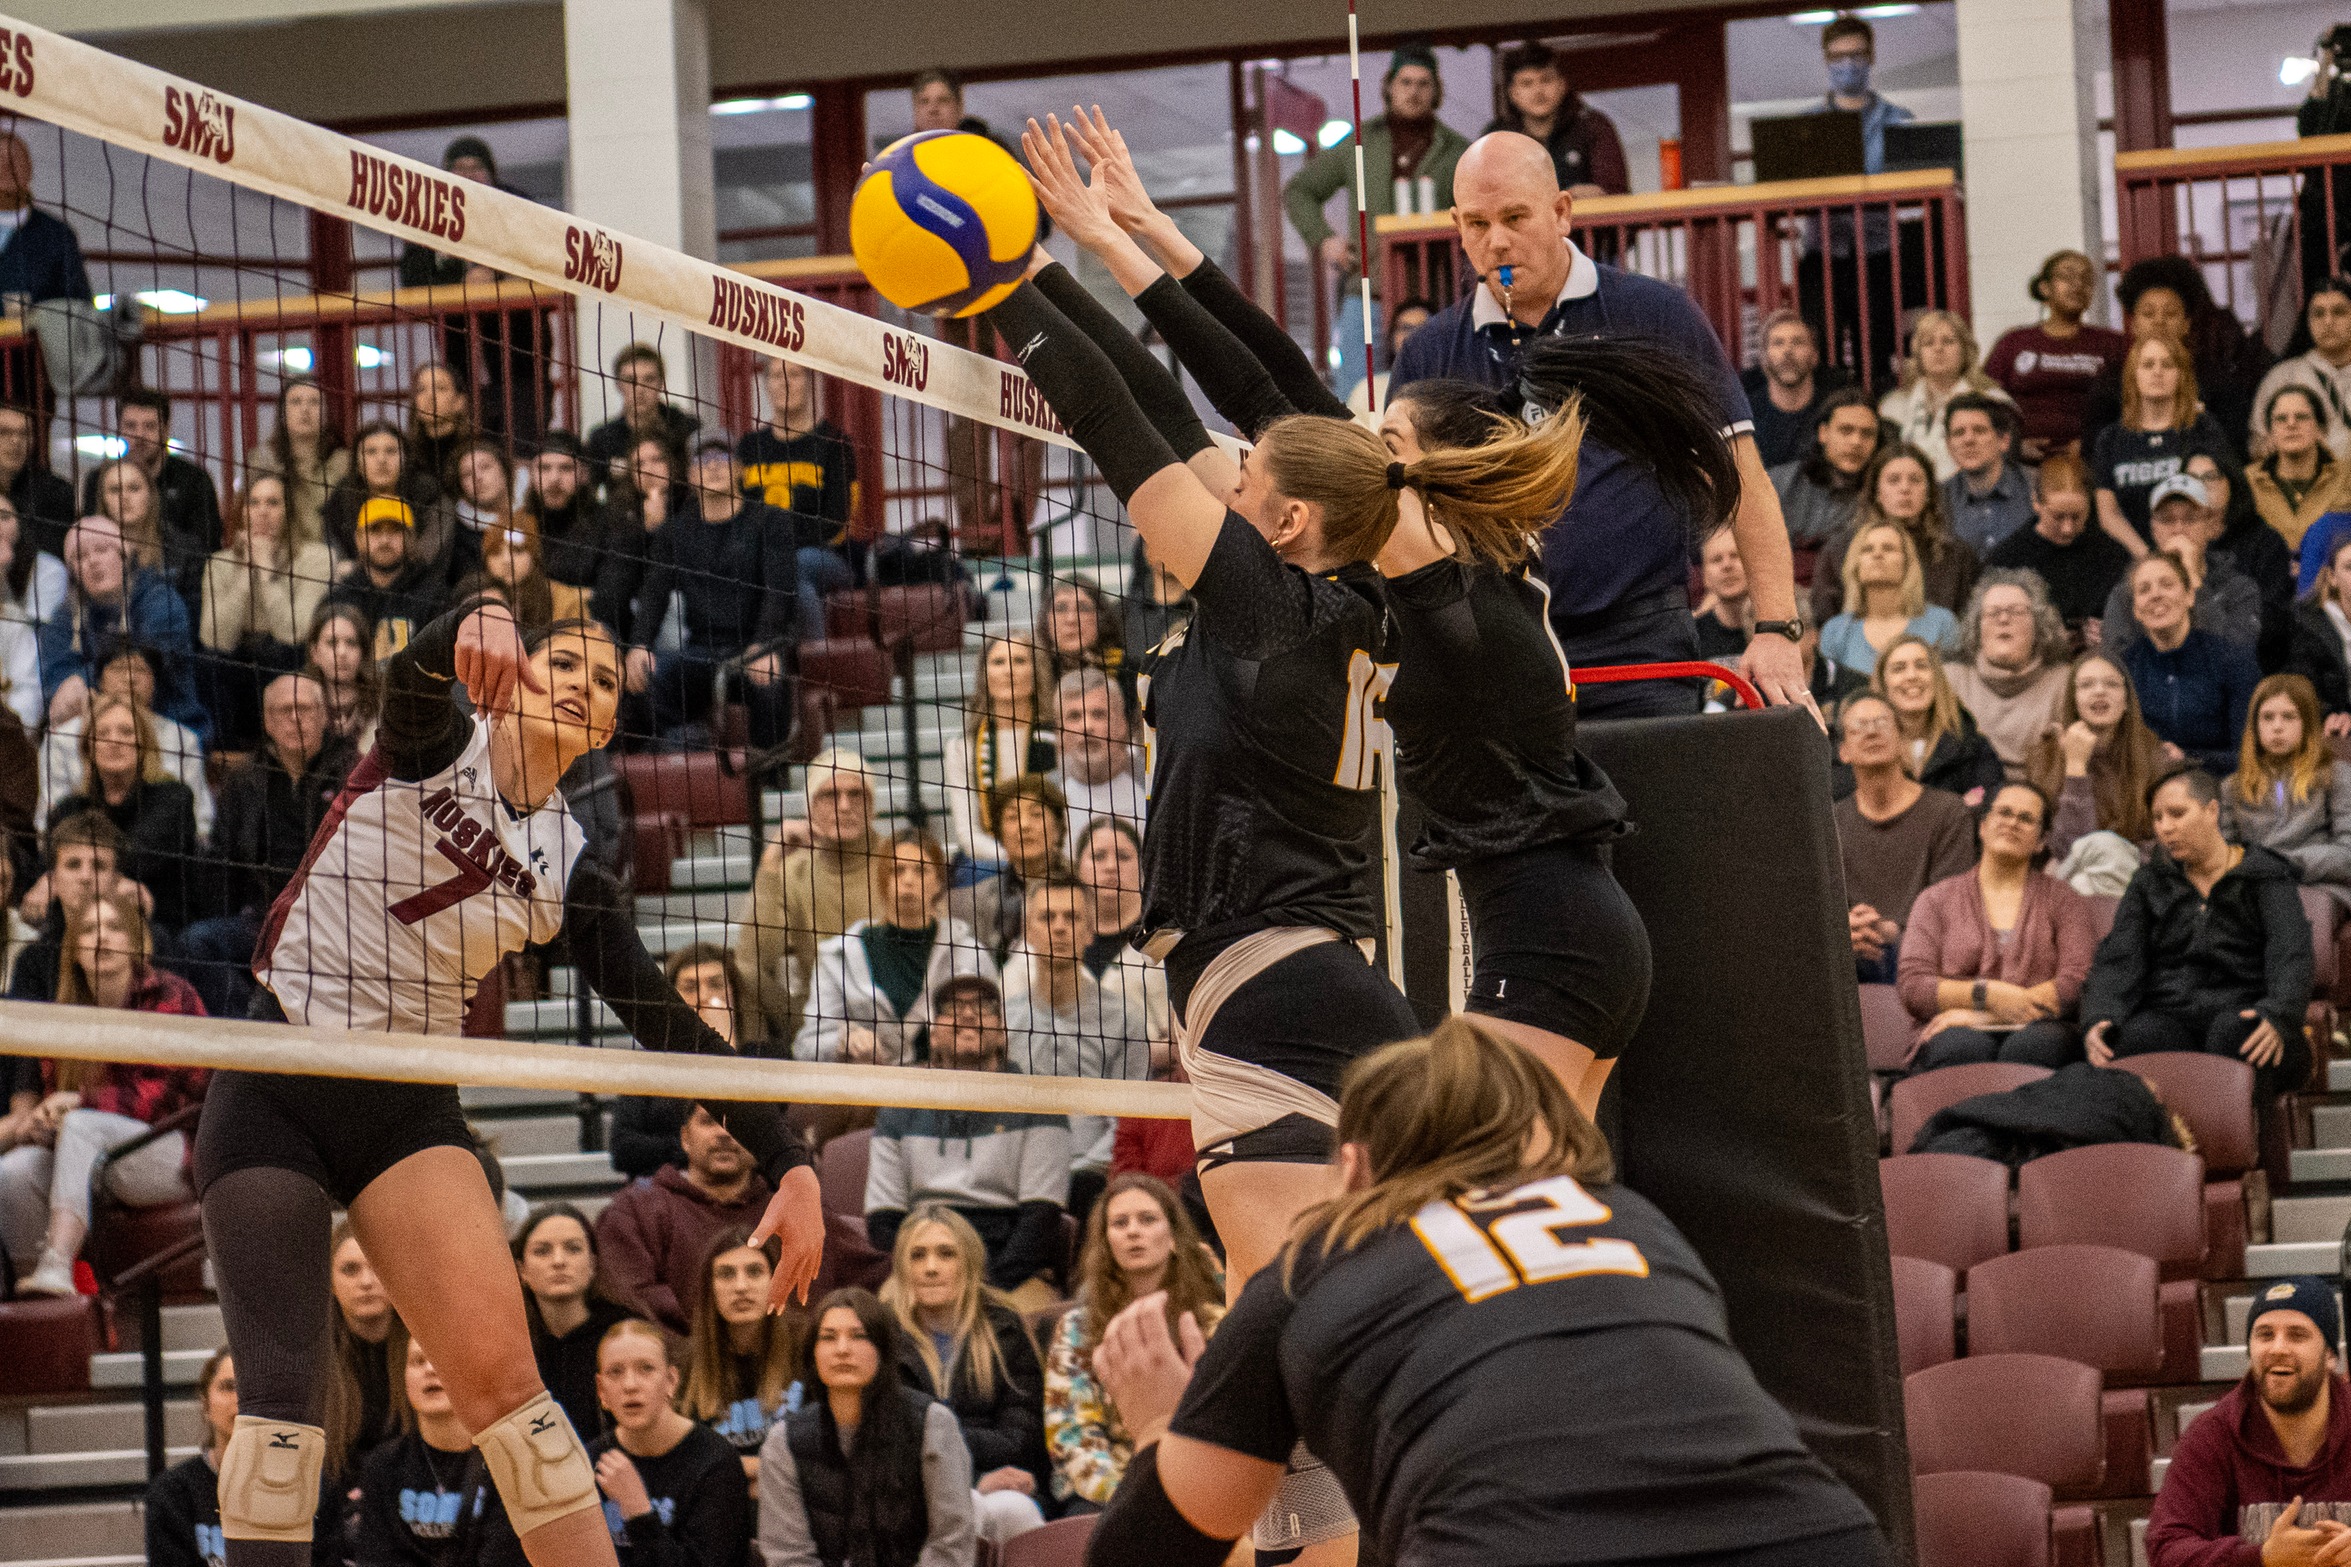 Mikanovich, Bell lead Huskies to straight set win over Tigers in game one of AUS semifinal